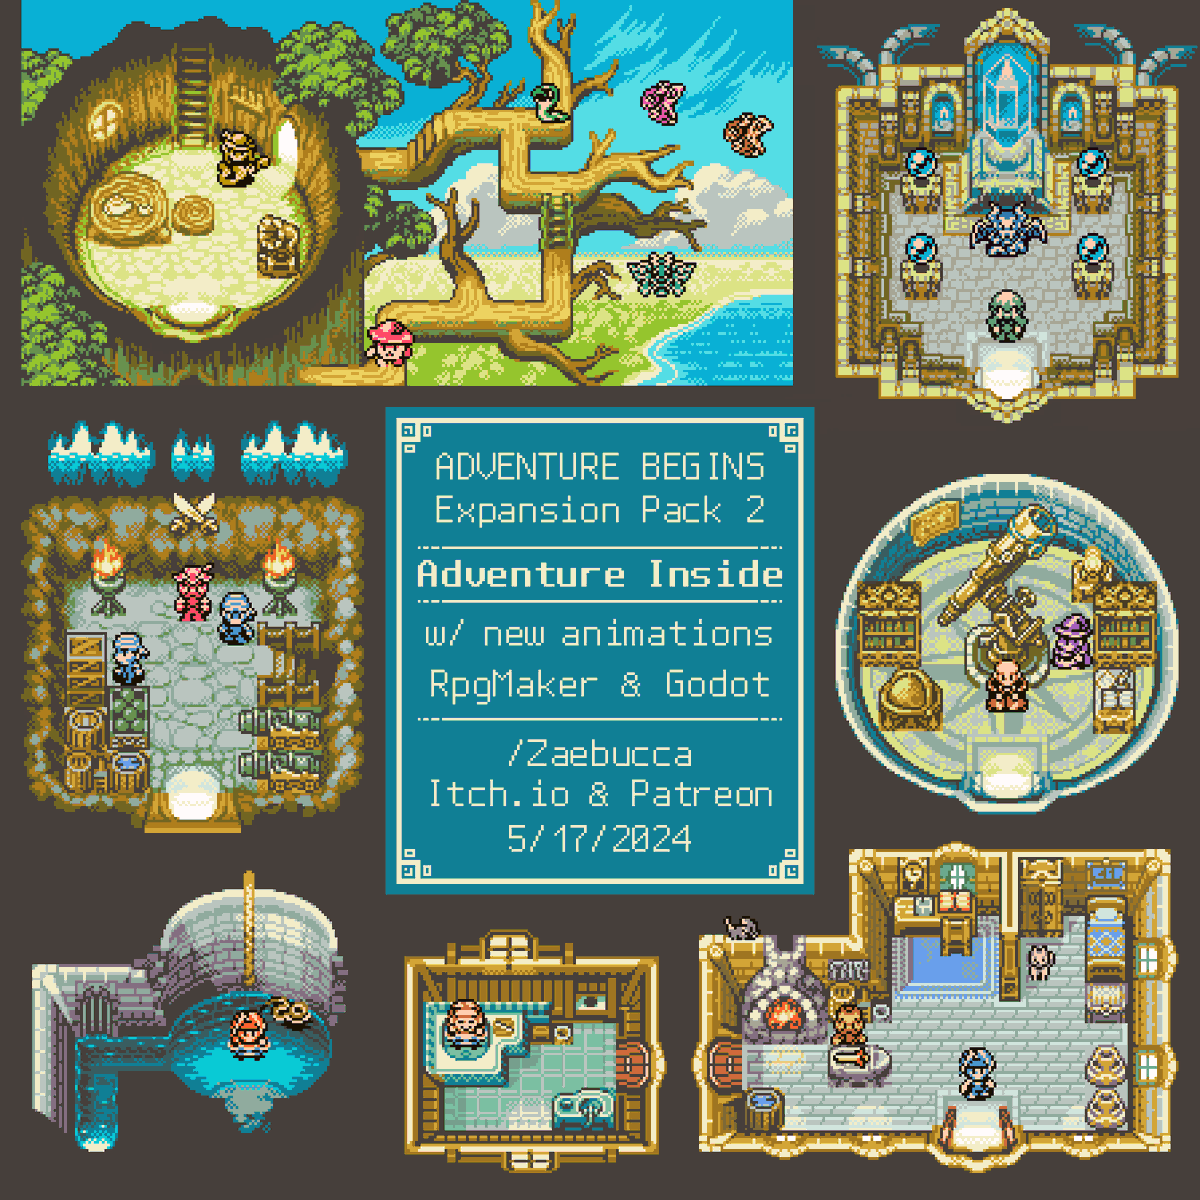 Adventure... Inside!
This new, big update to my asset collection focuses on interiors, but also provides new exteriors and animations for Adventure Begins!
#pixelart #screenshotsaturday